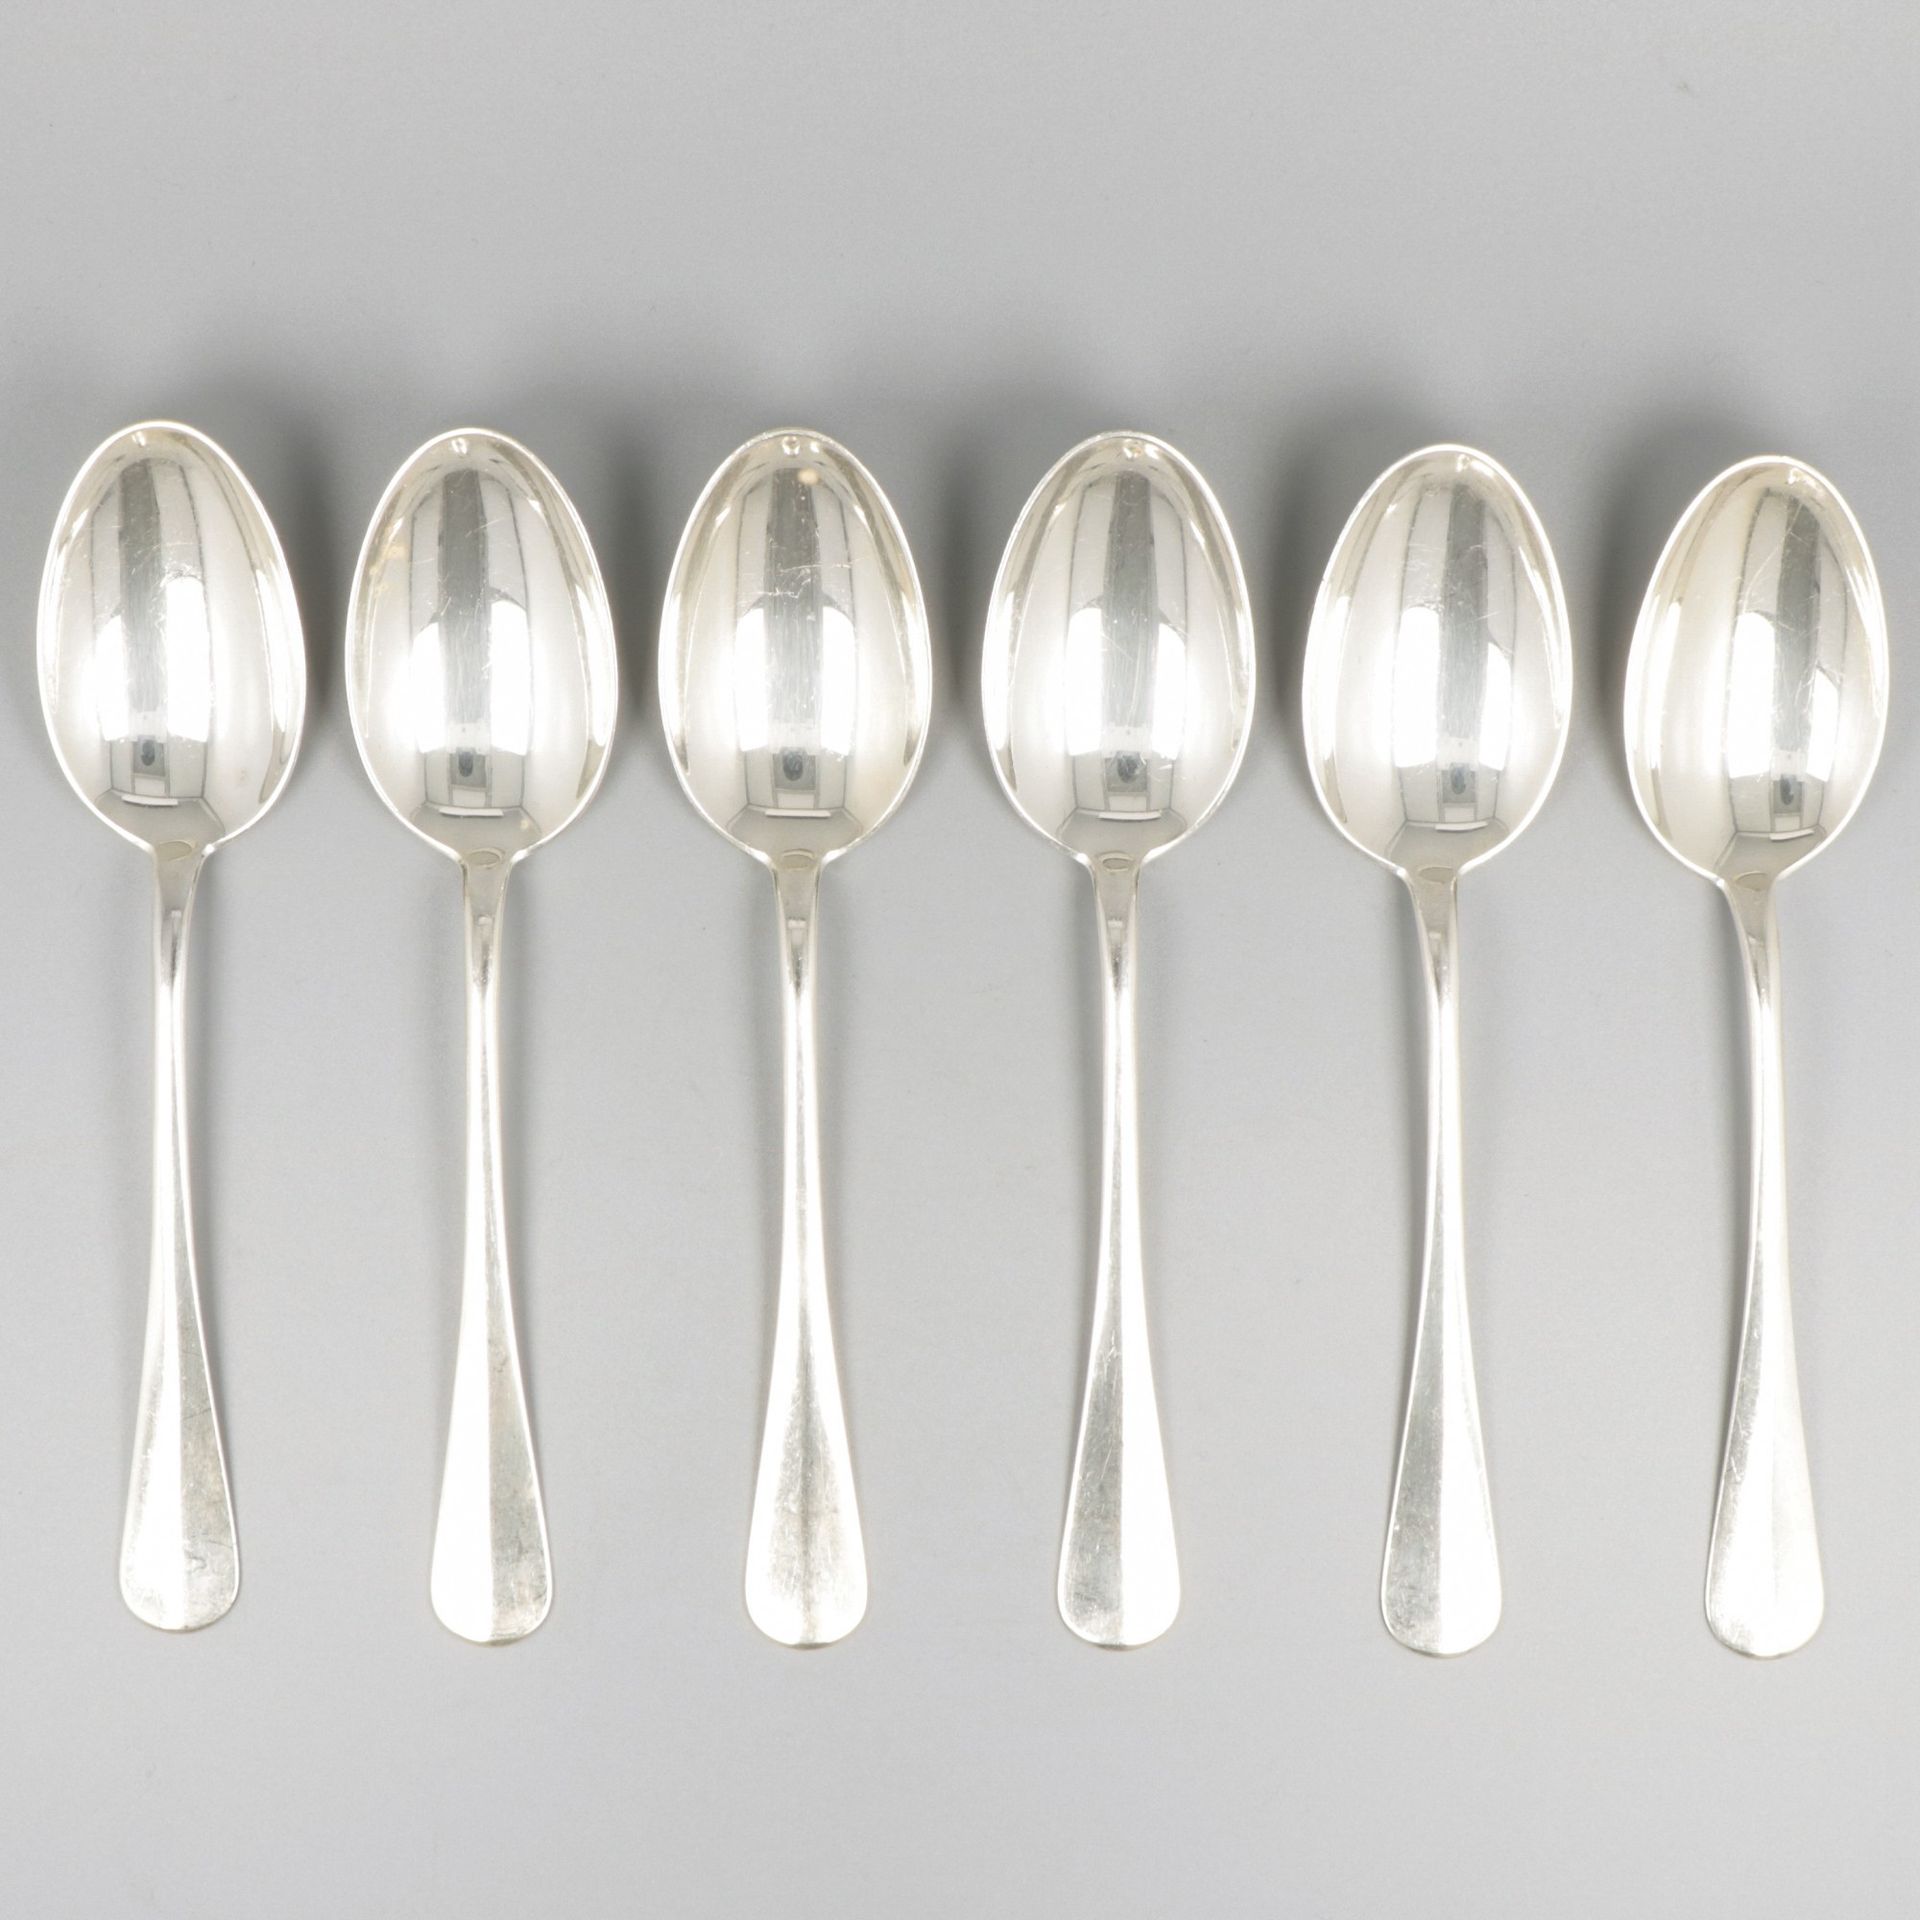 6-piece set dinner spoons silver. "Hollands glad" or Dutch smooth. The Netherlan&hellip;